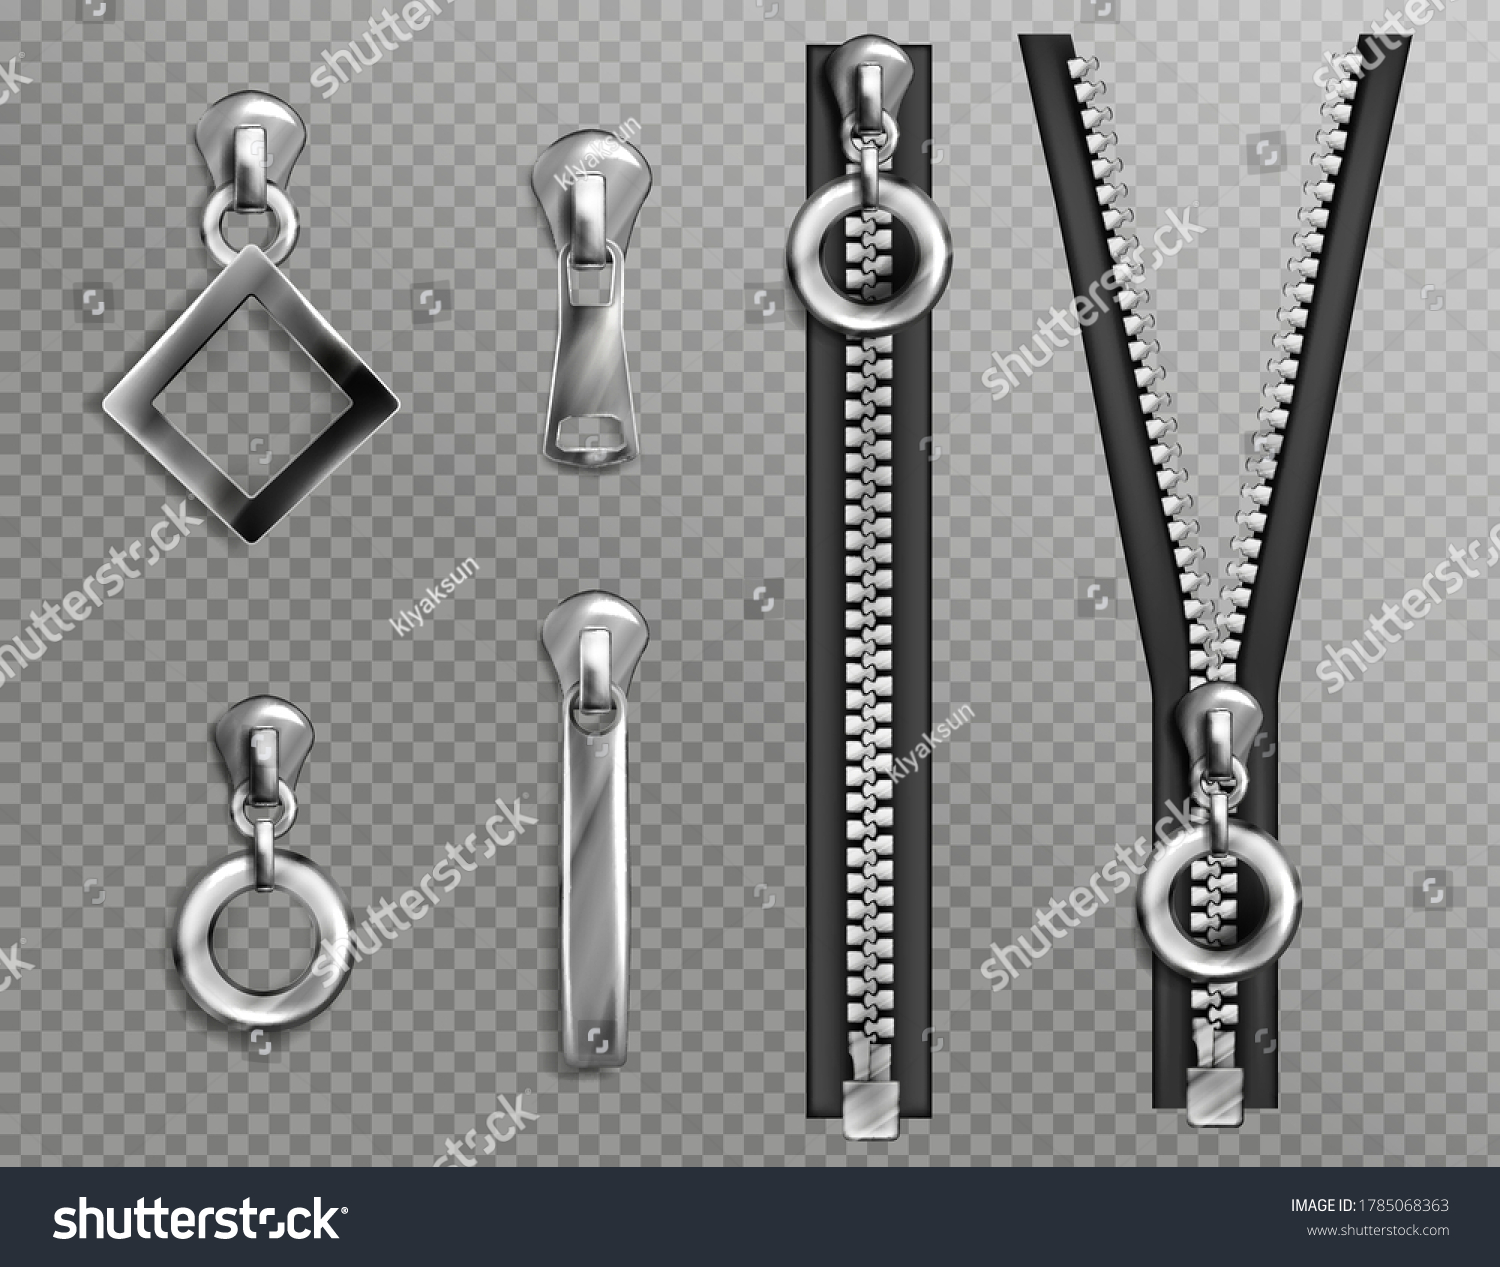 SVG of Metal zip fasteners, silver zippers with differently shaped puller and open or closed black fabric tape, clothing hardware isolated on transparent background, Realistic 3d vector illustration, set svg